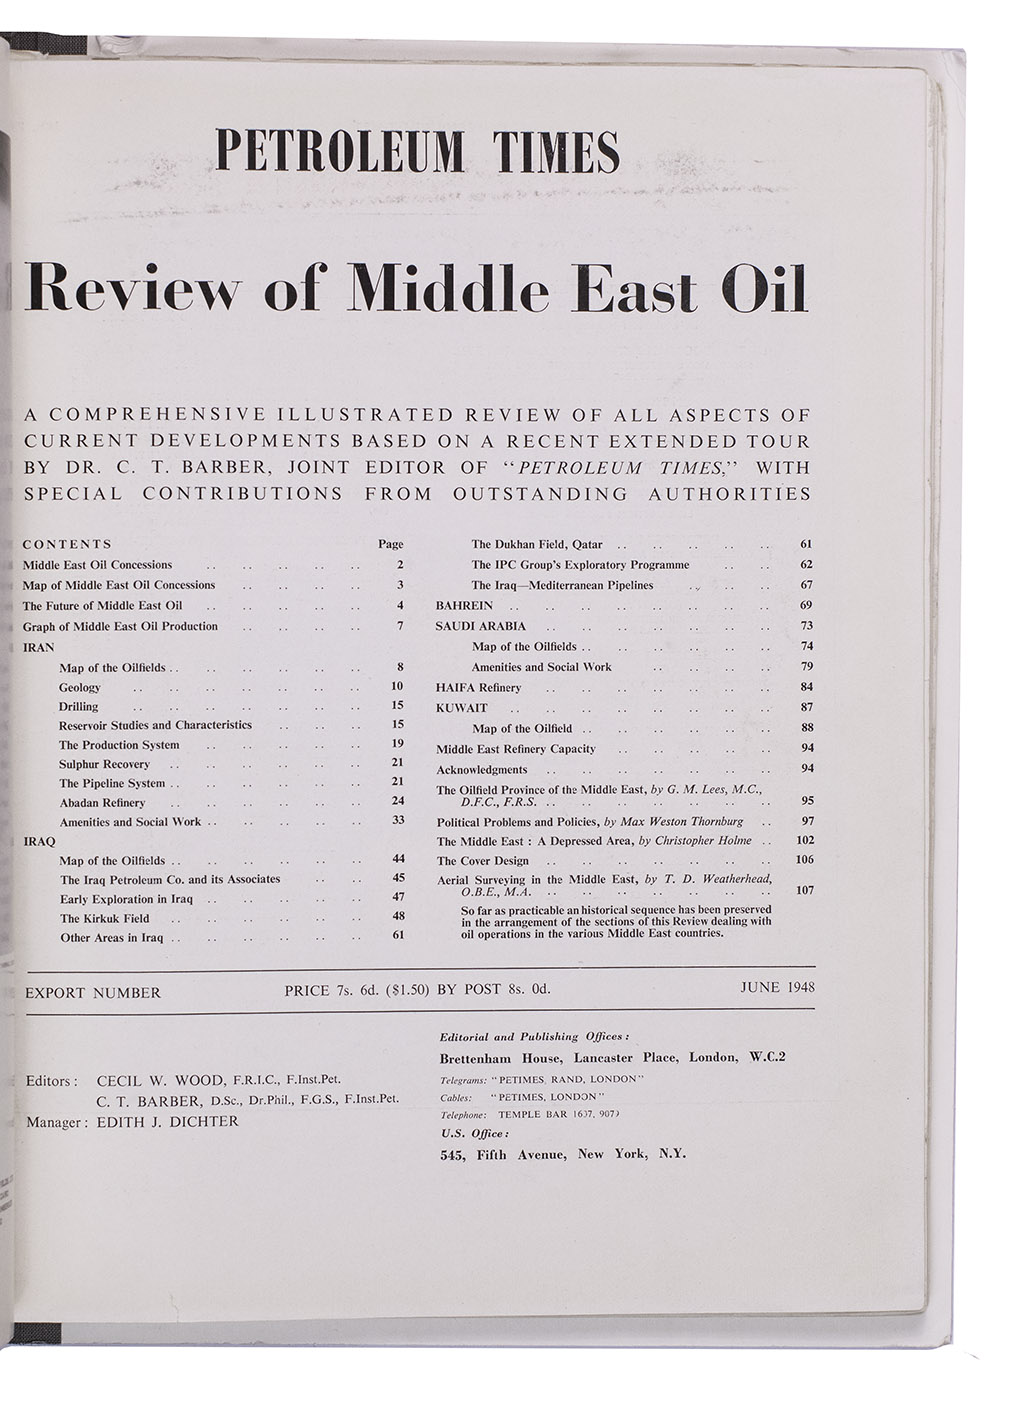 [OIL - MIDDLE EAST]. - The Petroleum Times. [drop-title]: Review of Middle East oil. A comprehensive illustrated review of all aspects of current developments based on a recent extended tour by Dr. C.T. Barber, ...London, Brettenhem house, June 1948. 30 x 23.5 cm. With many reproductions of photographs, ground plans, maps, and cross-sections. Later cardboard binder.